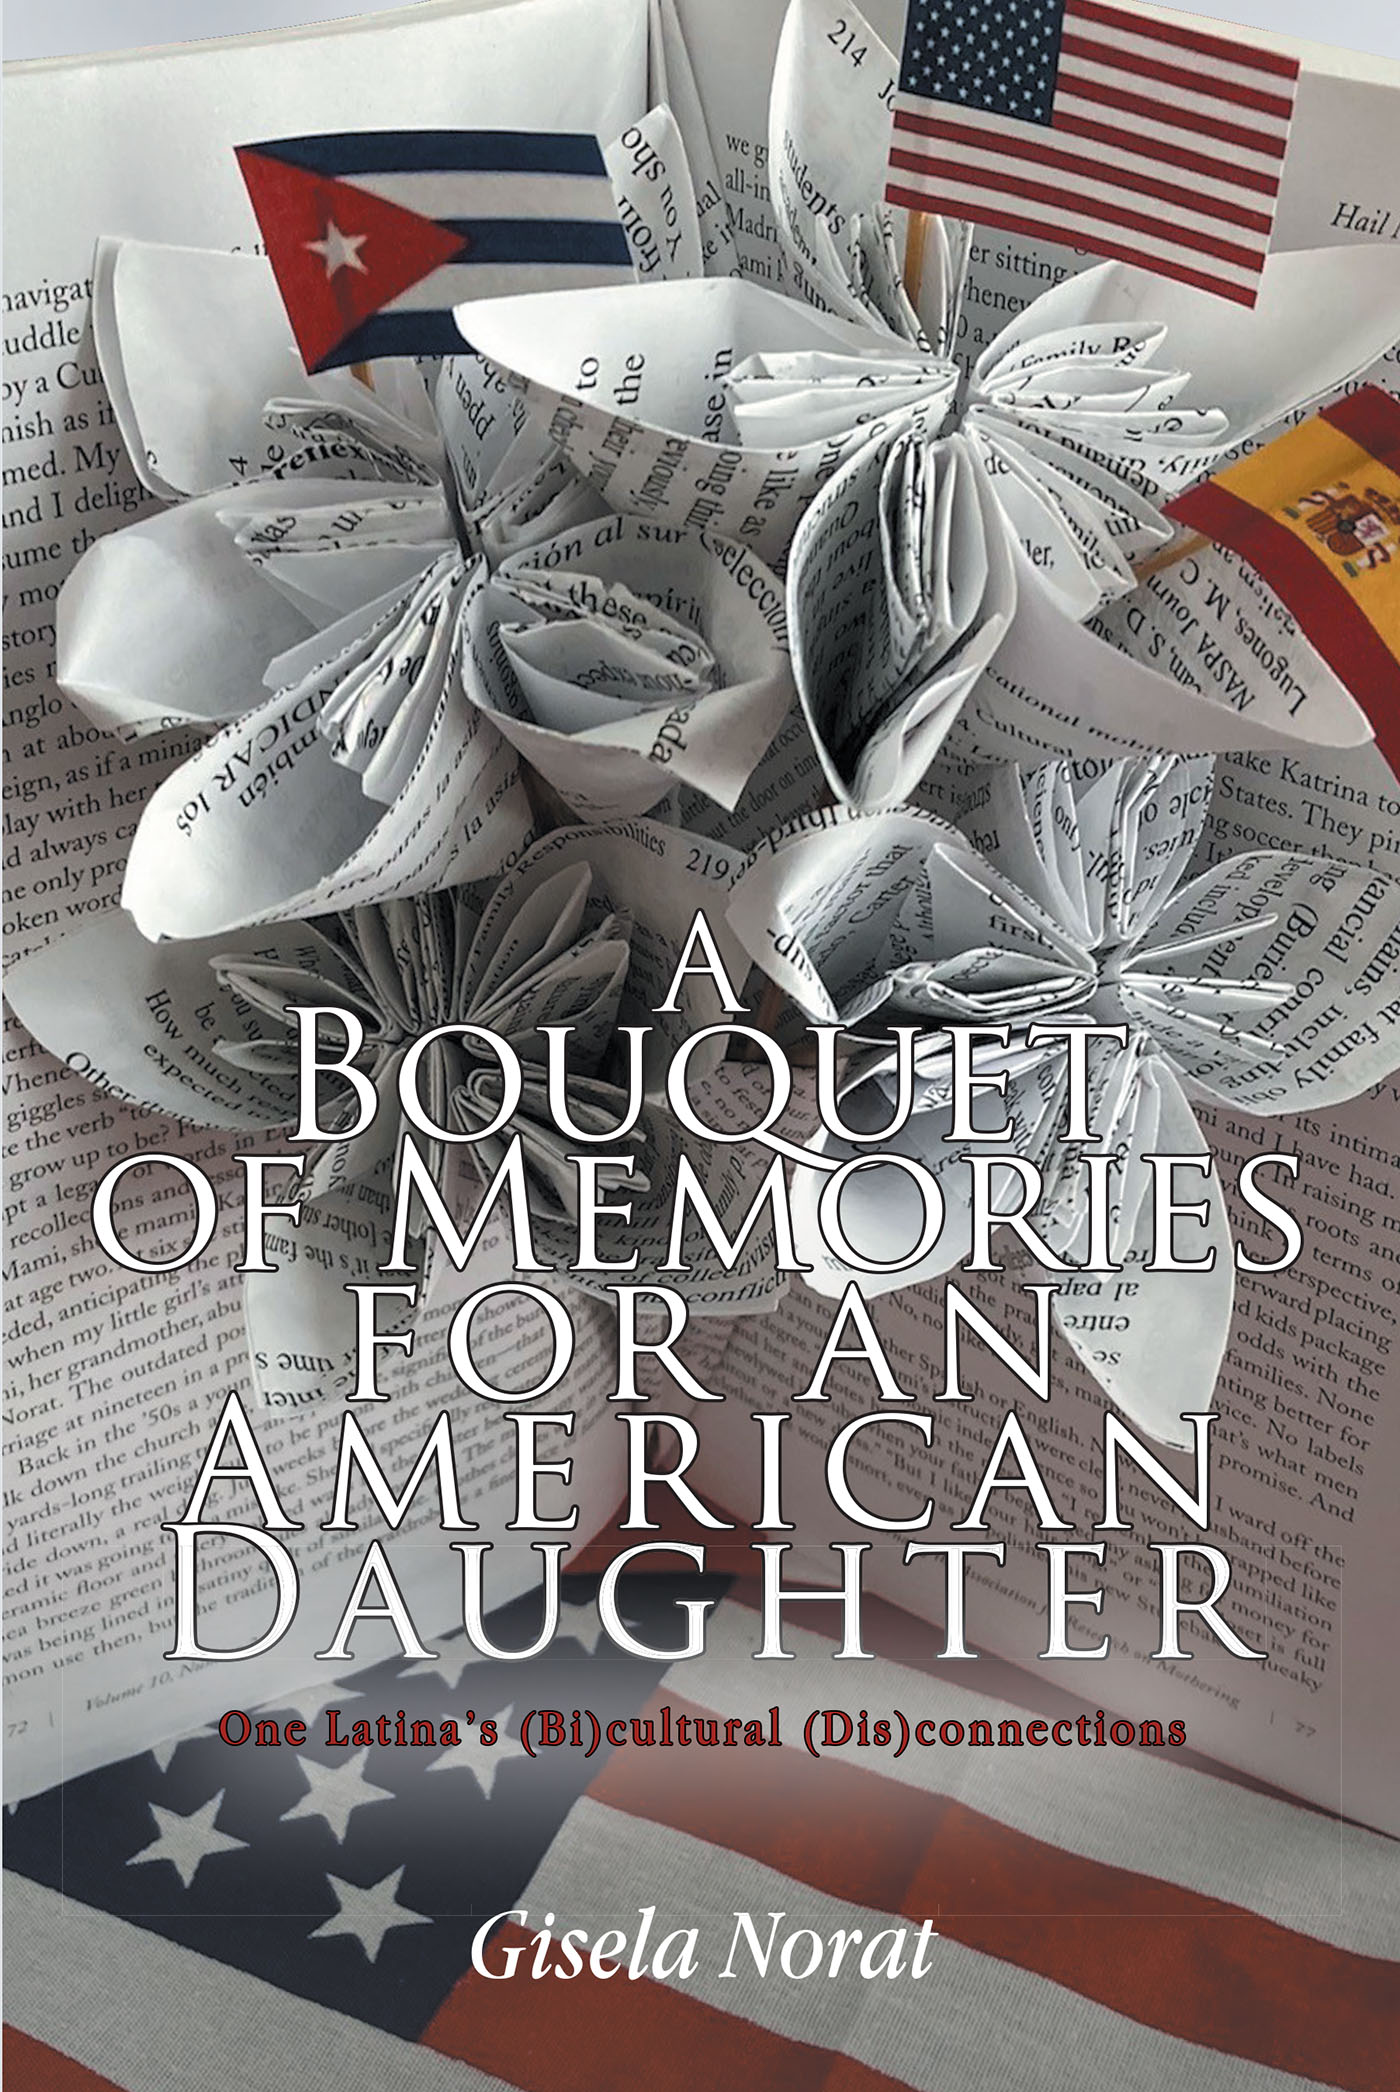 Gisela Norat’s Newly Released “A BOUQUET OF MEMORIES FOR AN AMERICAN DAUGHTER” is a Fascinating Memoir That Examines Cultural Influences